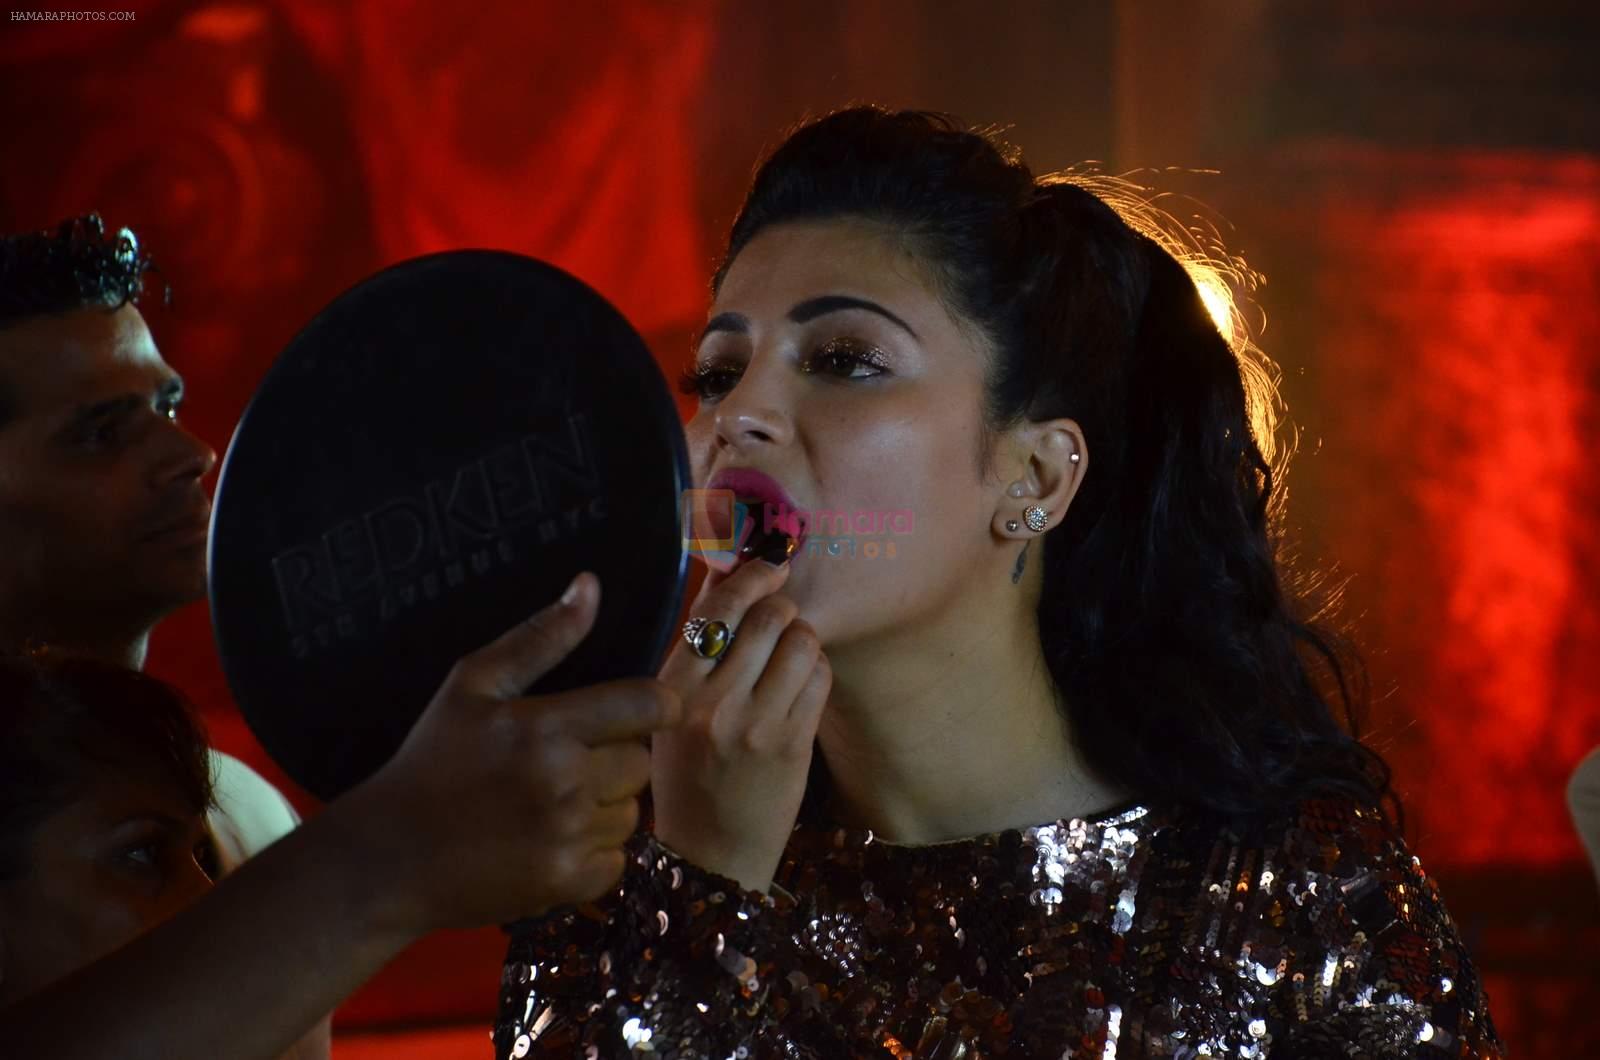 Shruti Haasan at Welcome Back song shoot in Aarey Milk Colony on 13th July 2015